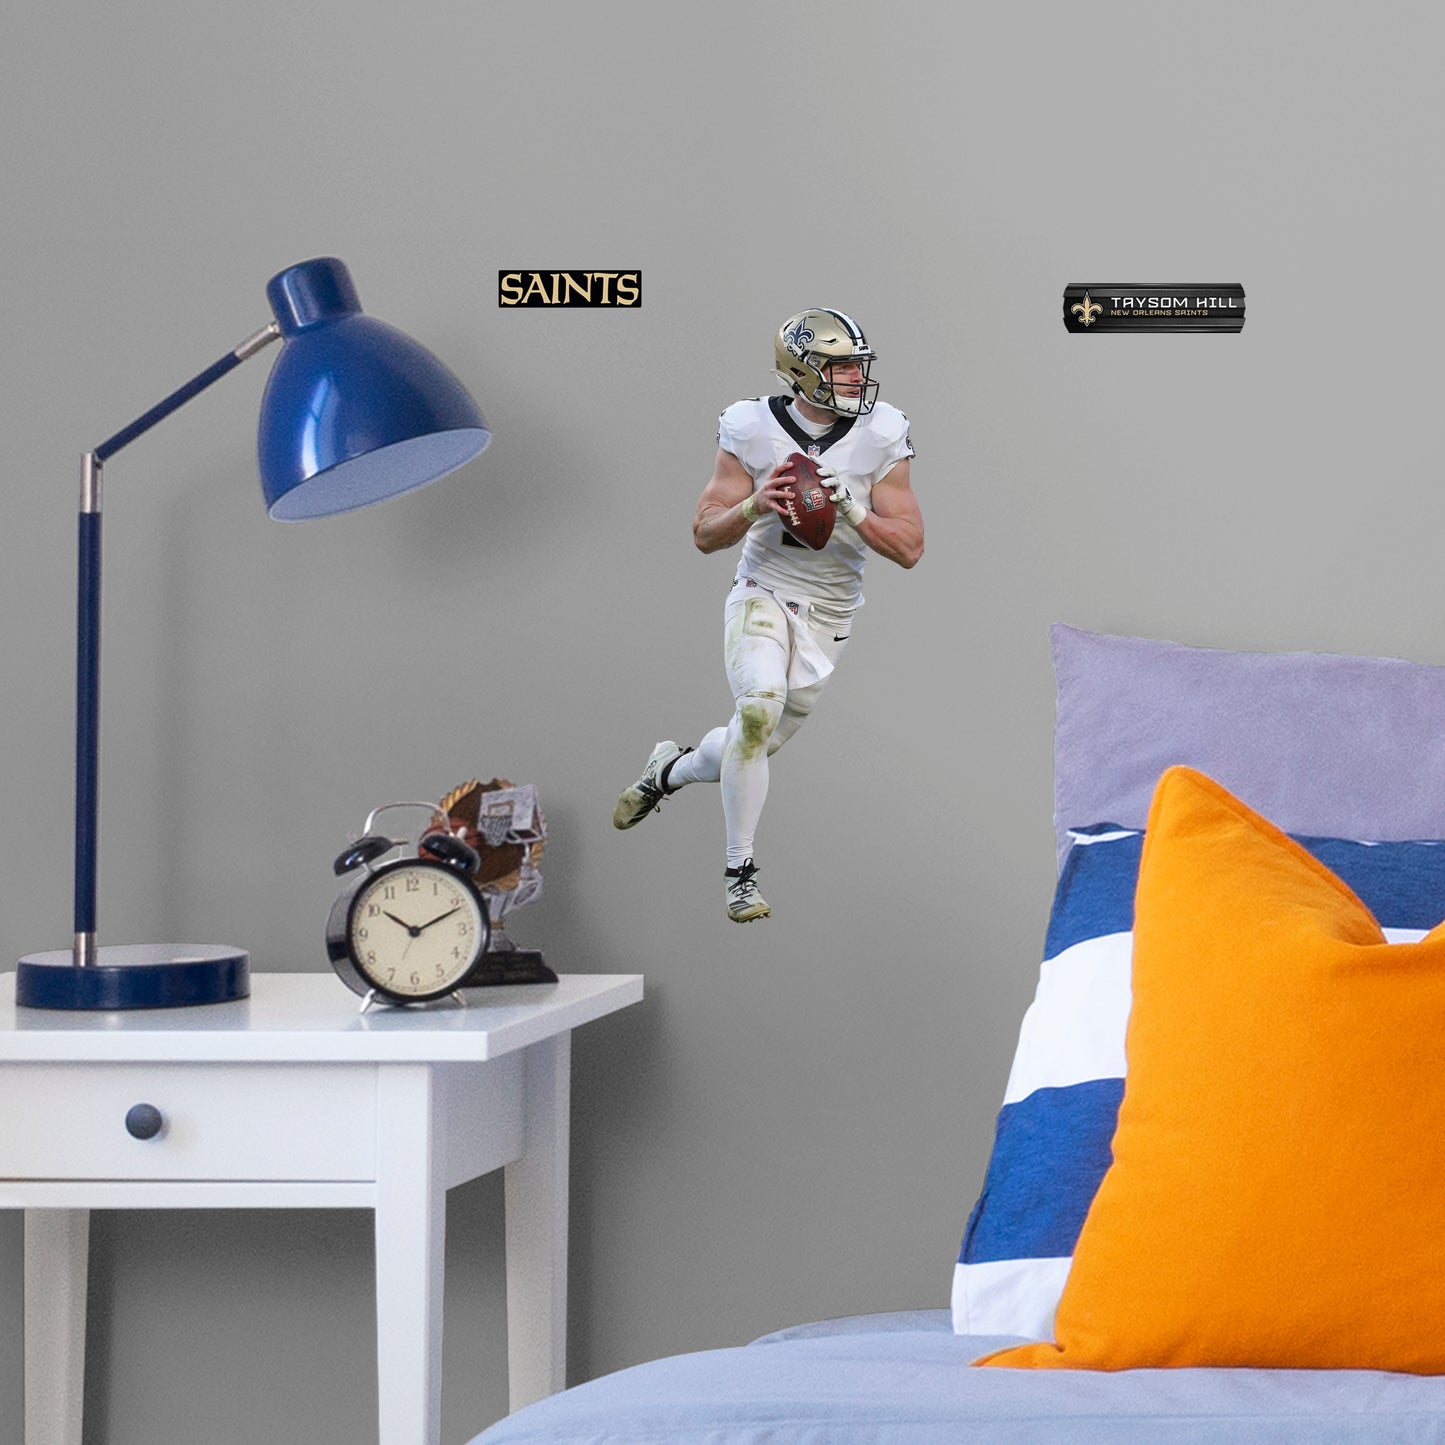 Large Athlete + 2 Decals (8"W x 16"H) Bring the action of the NFL into your home with a wall decal of Taysom Hill! High quality, durable, and tear resistant, you'll be able to stick and move it as many times as you want to create the ultimate football experience in any room!